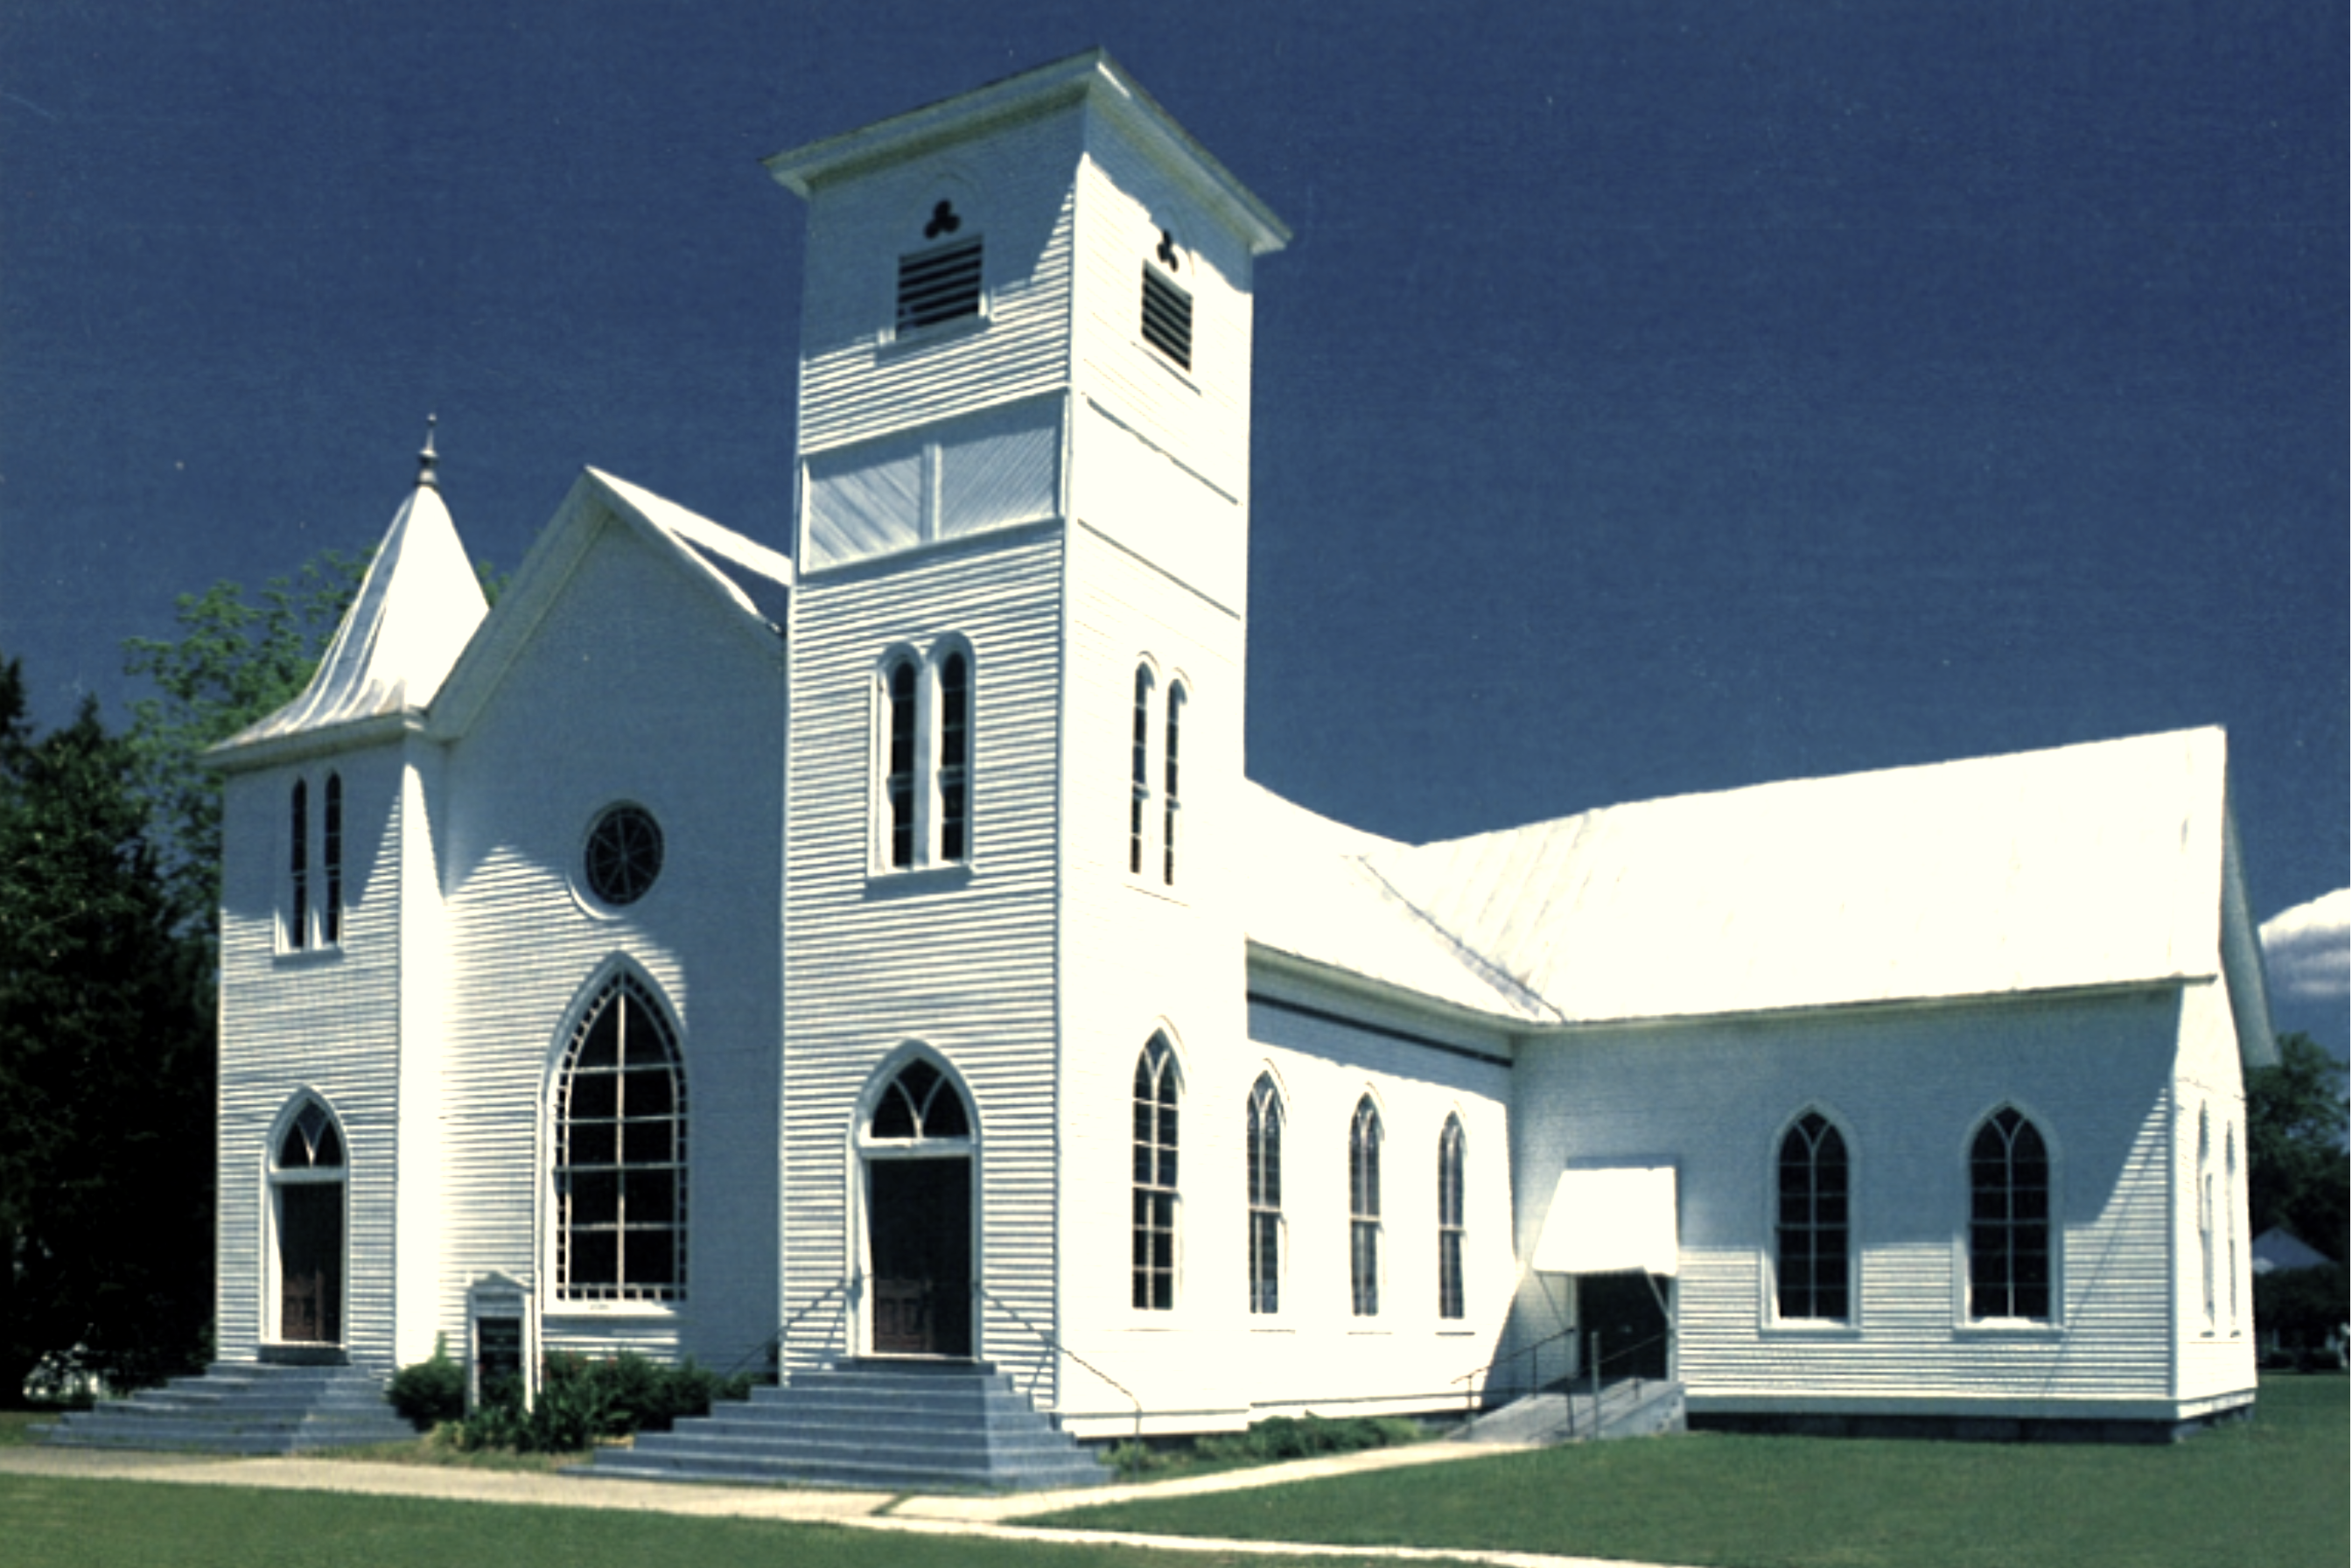 Kadesh A. M. E. Zion Church exterior in 2002, prior to Hurricane Isabel. Image courtesy of Norman Brinkley, Jr.